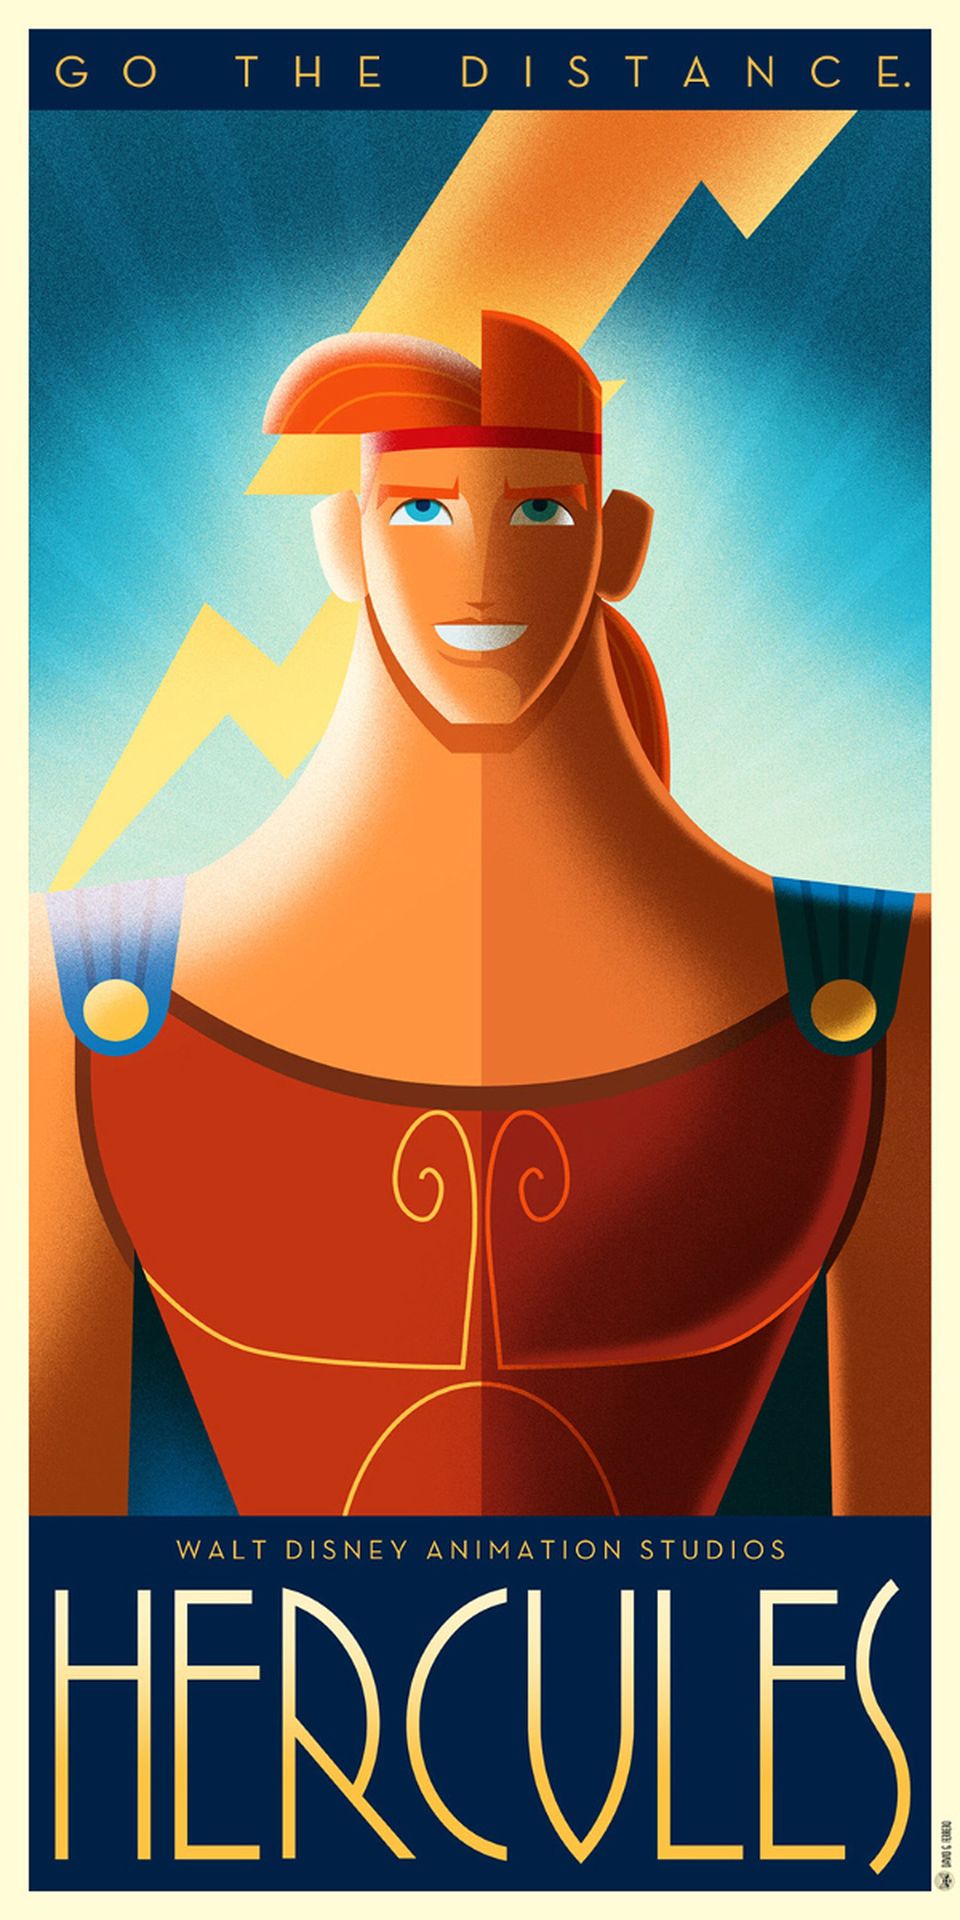 these-12-amazing-art-deco-disney-posters-bring-a-whole-new-world-of-20s-glamour-624696